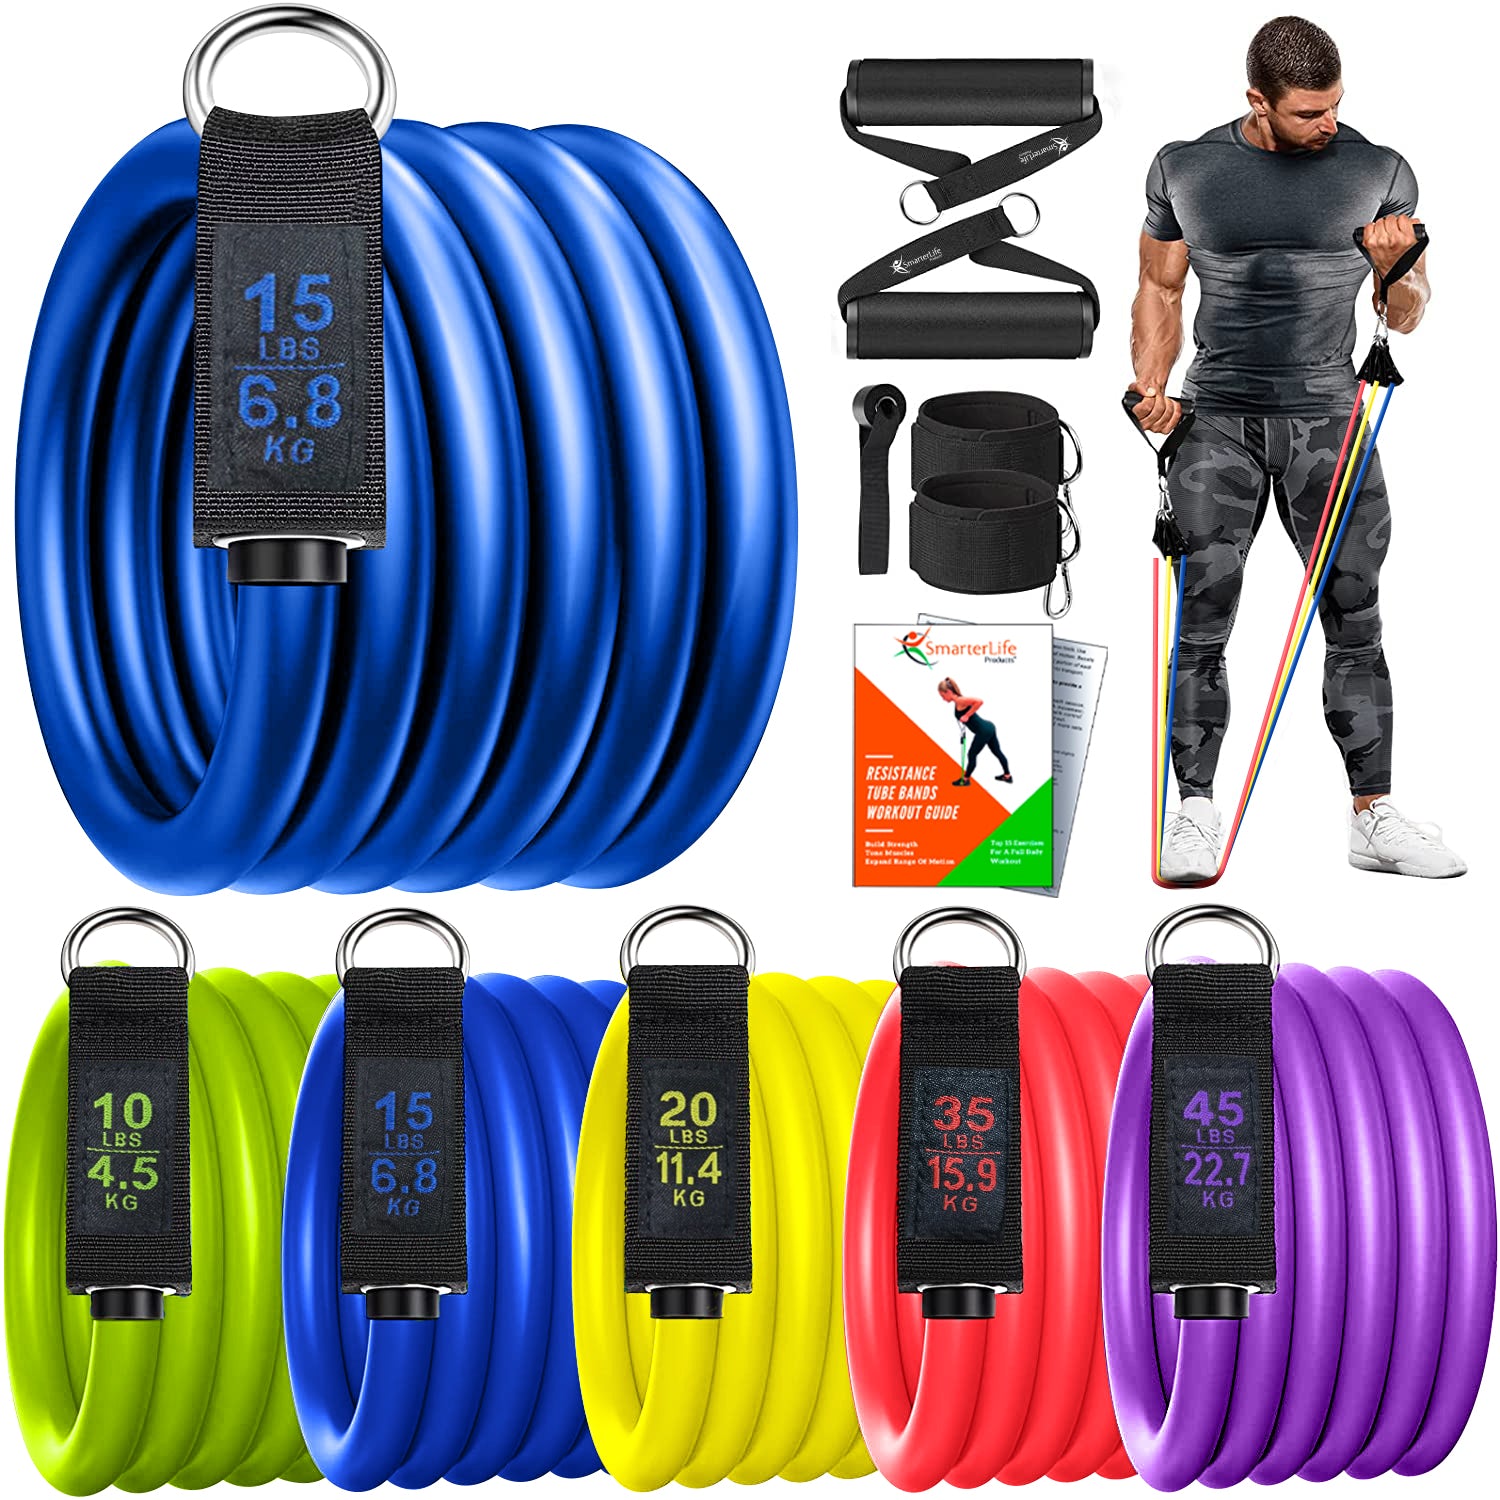 5 Best Resistance Bands for Working Out in 2022